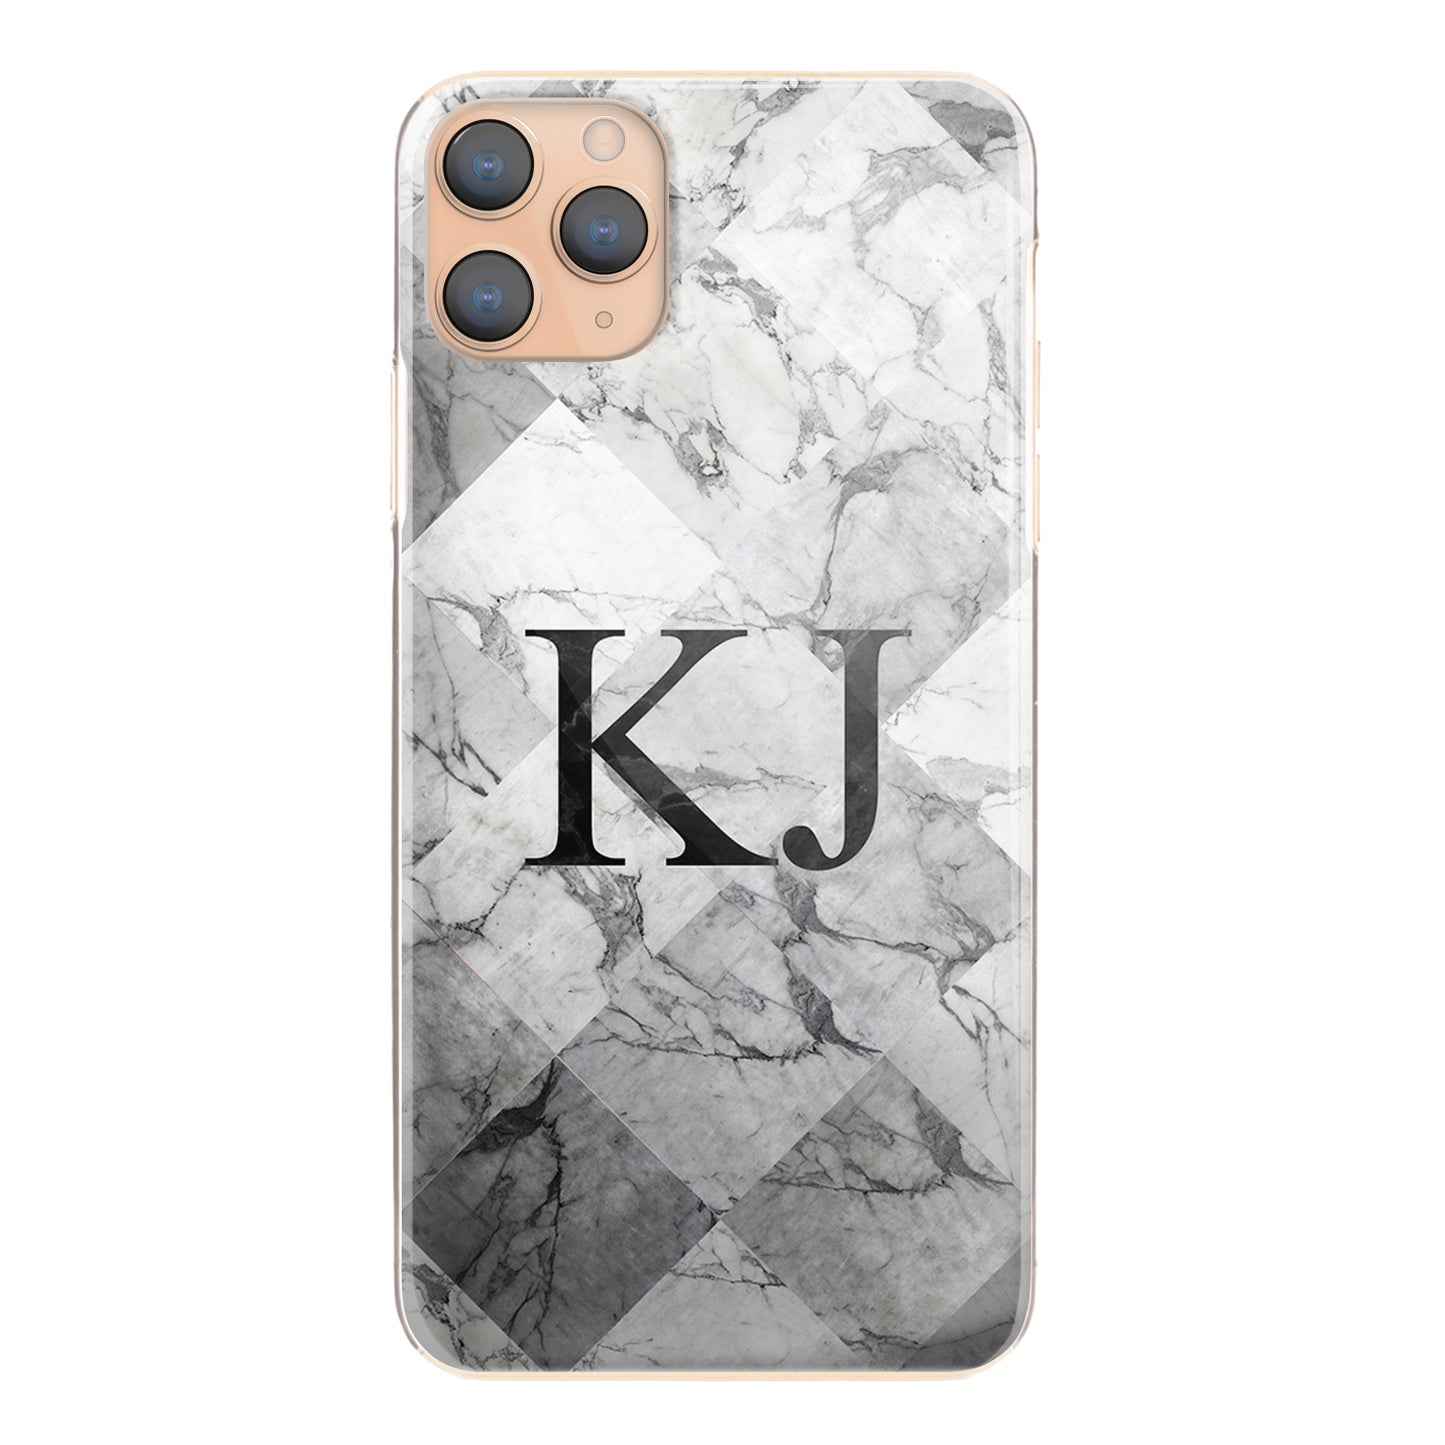 Personalised Google Phone Hard Case with Traditional Initials on Patterned Grey Marble